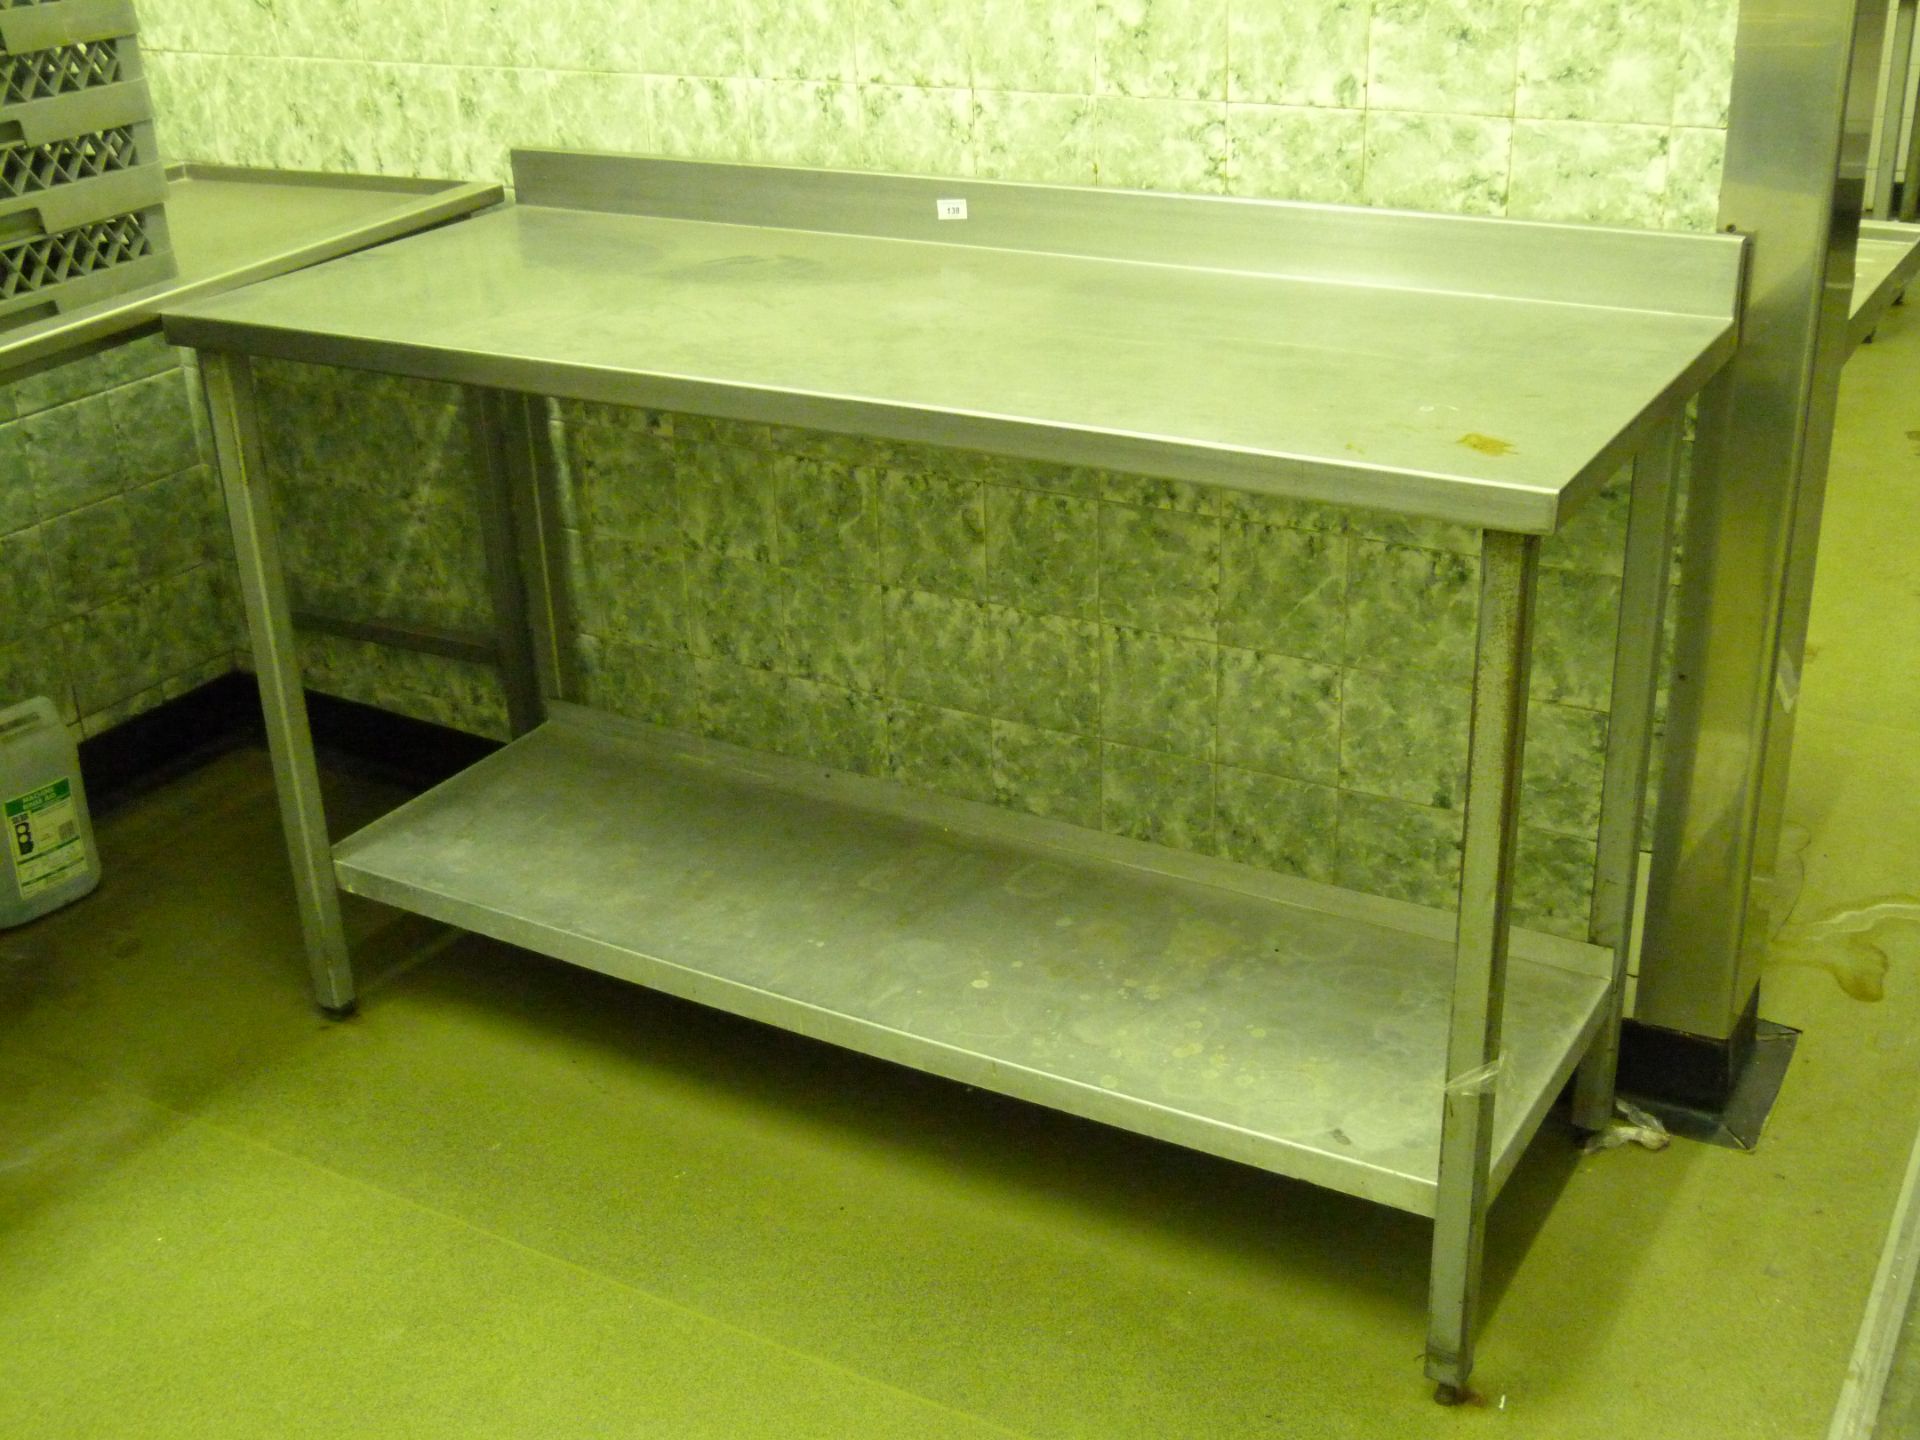 A steel framed stainless steel topped preparation table with shelf 153cm x 62cm